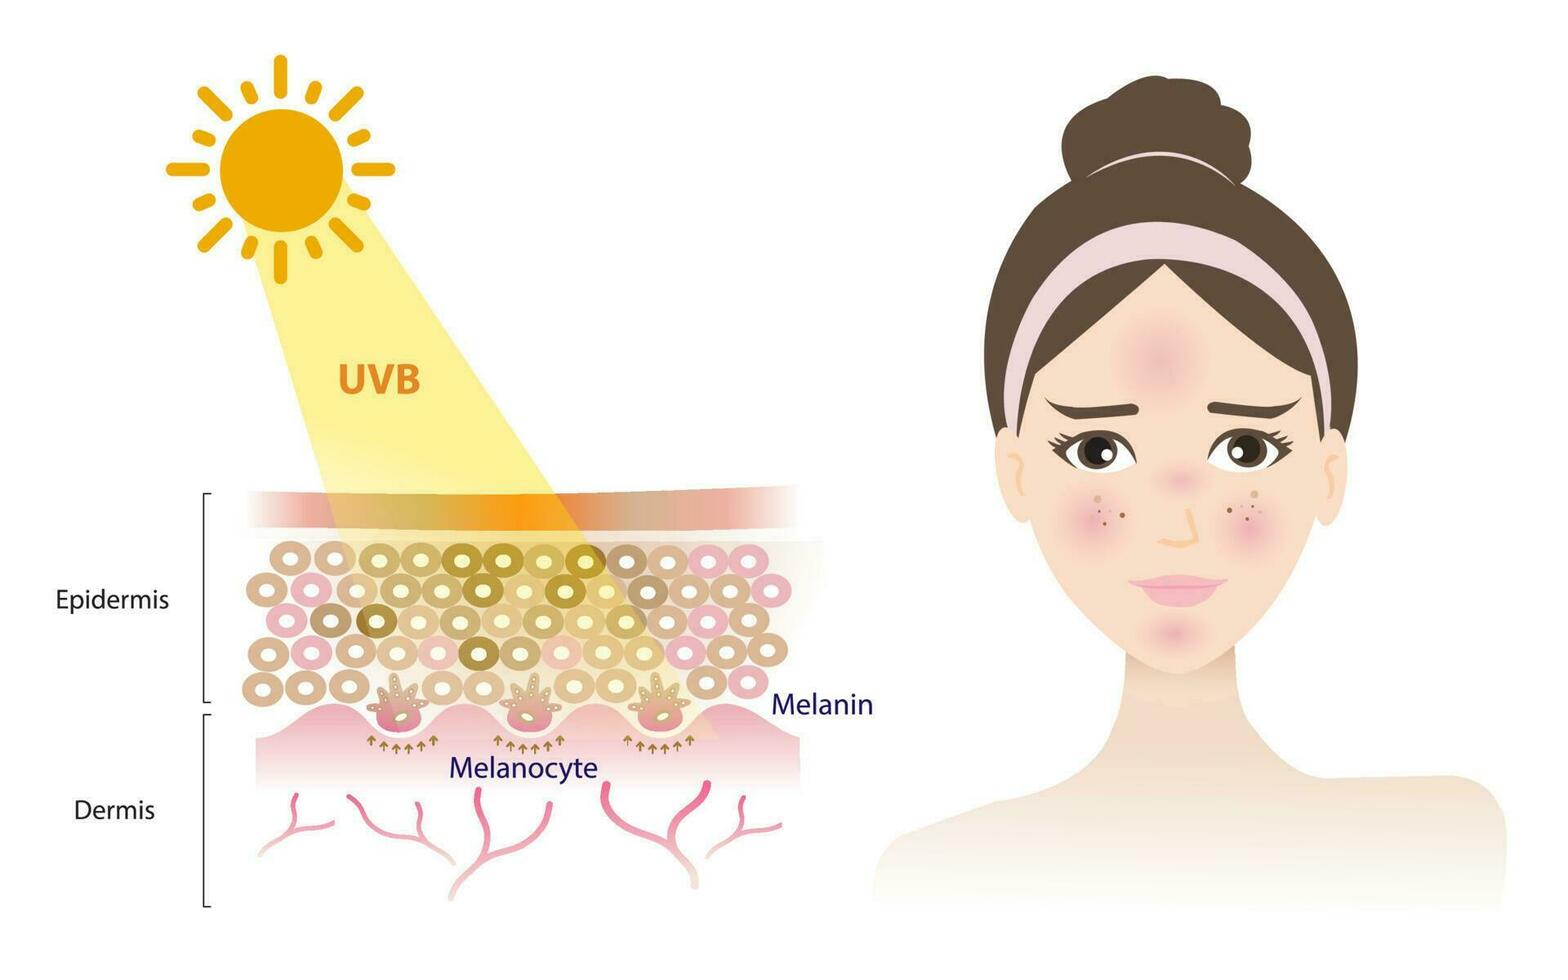 UVB rays penetrate into the epidermis skin layer, damage woman face, resulting in a burn, inflammation, aging, wrinkle, red spots vector isolated on white background. Skin care concept illustration.